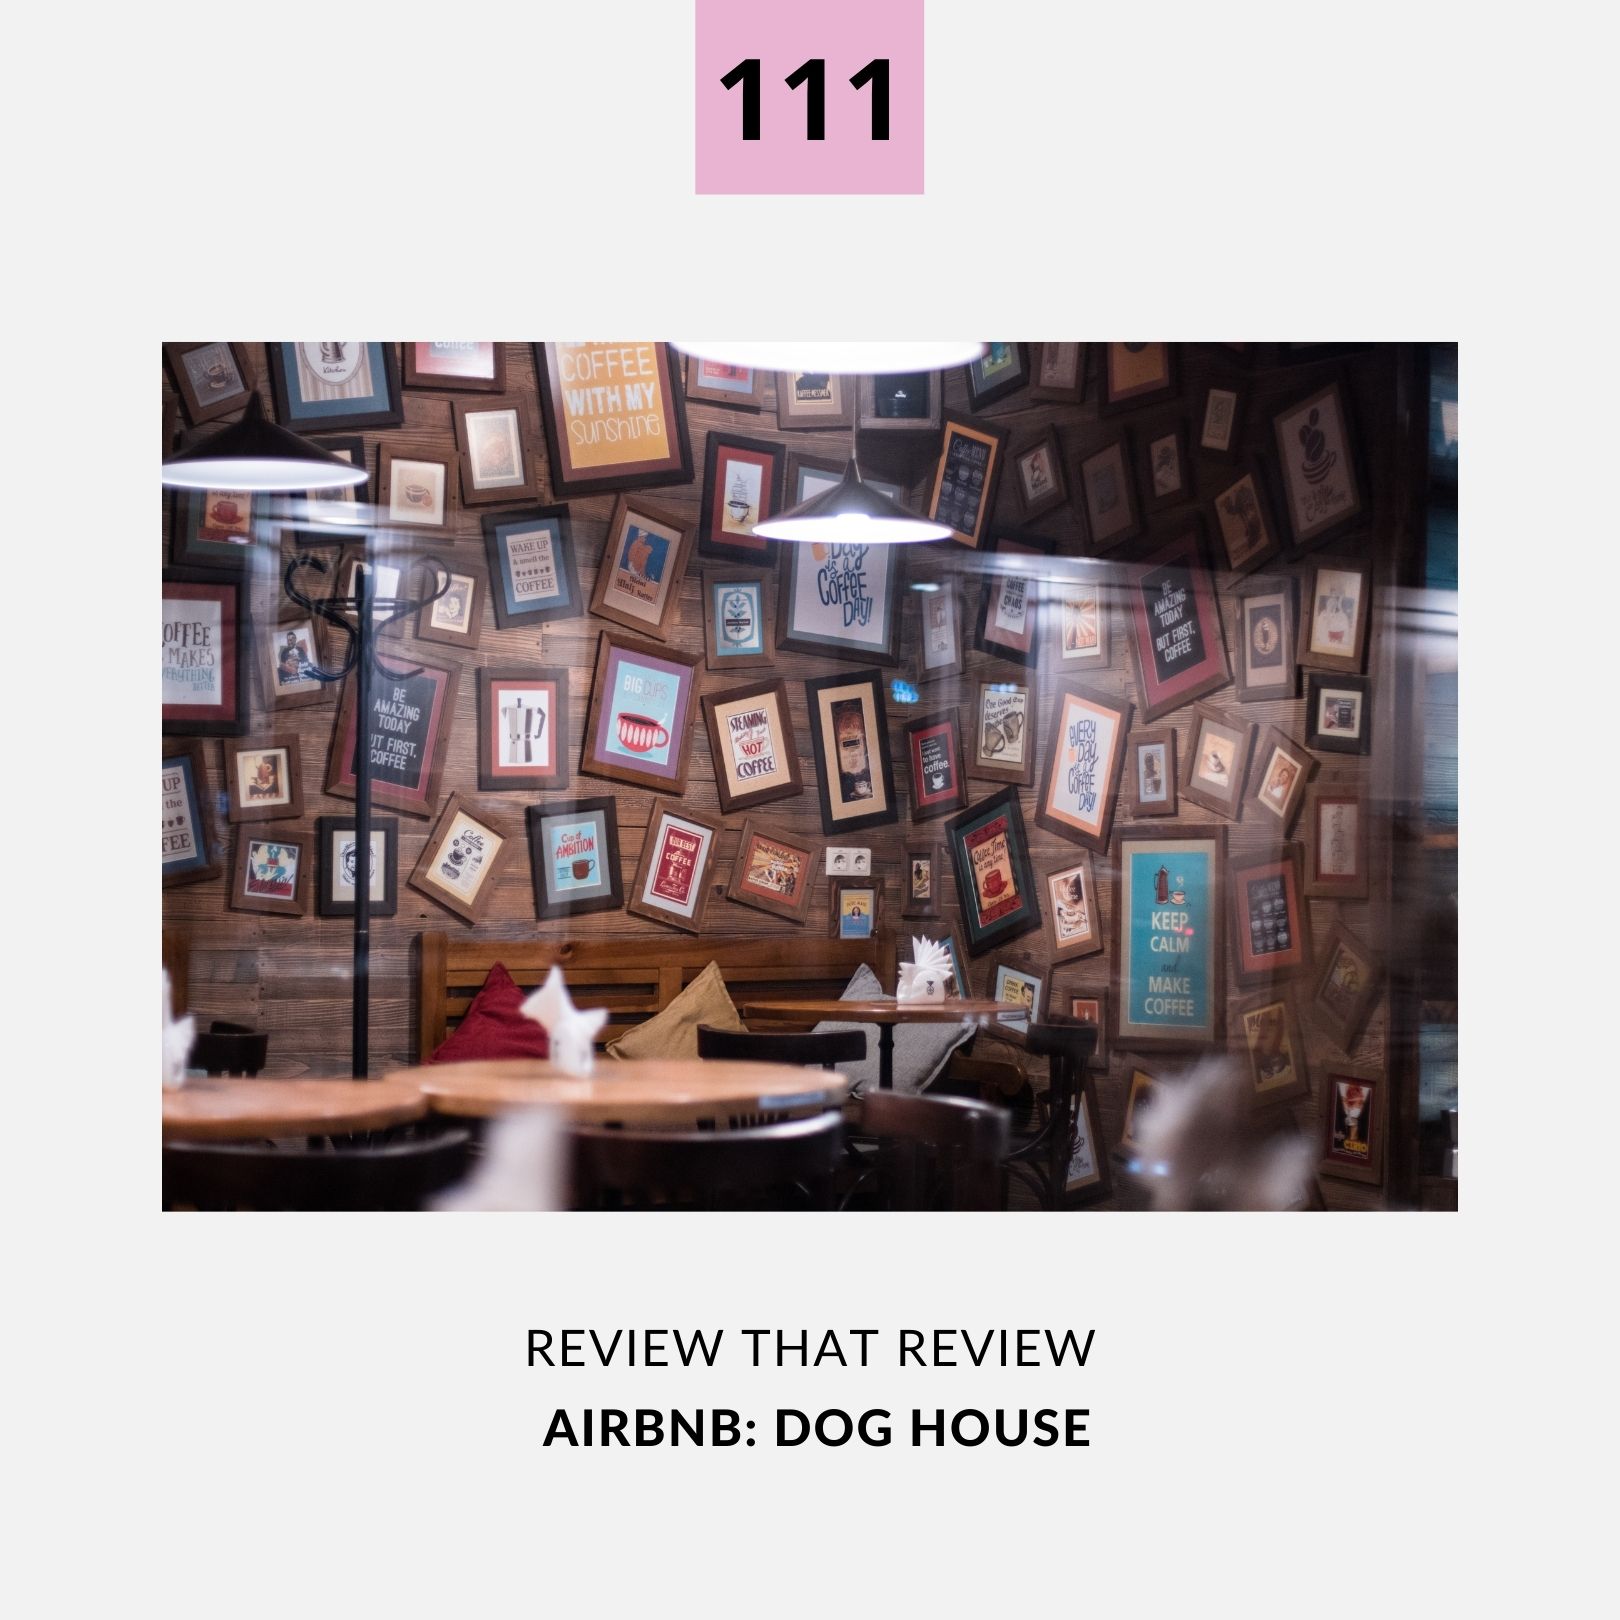 Episode 111: AirBnB Dog House - 1 Star Review